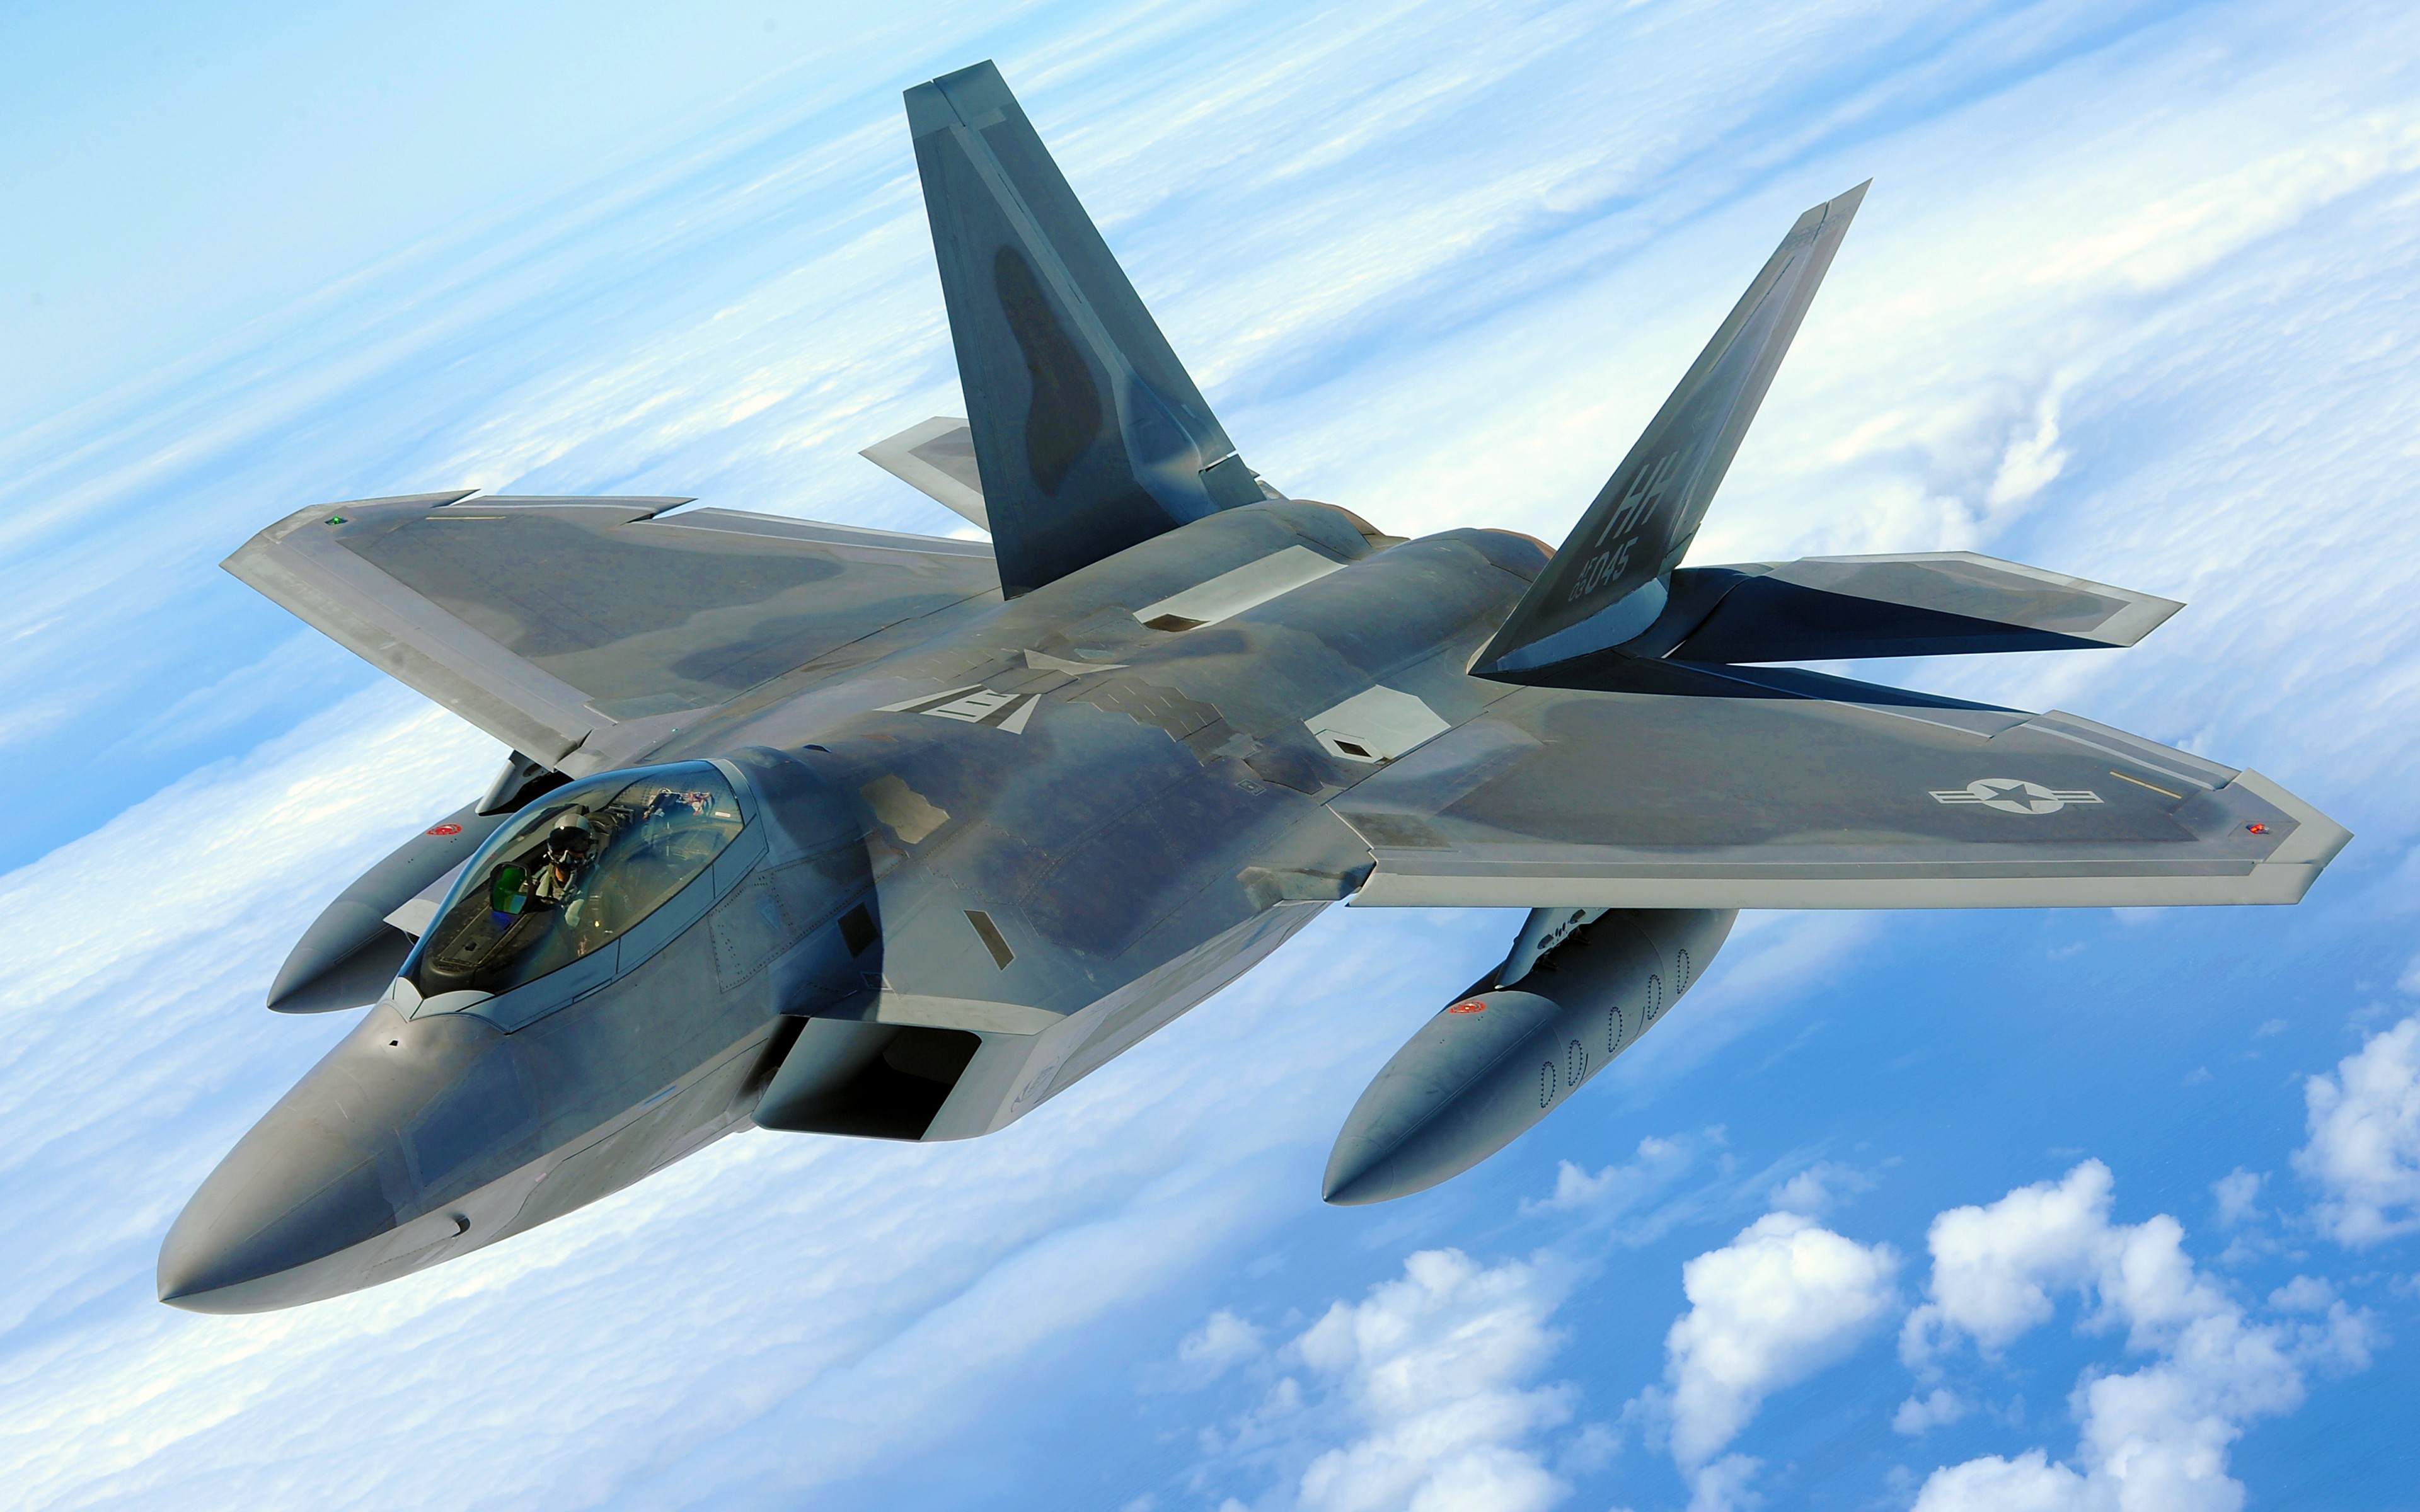 General 3840x2400 military aircraft aircraft US Air Force vehicle military vehicle military Lockheed Martin sky jet fighter F-22 Raptor clouds American aircraft